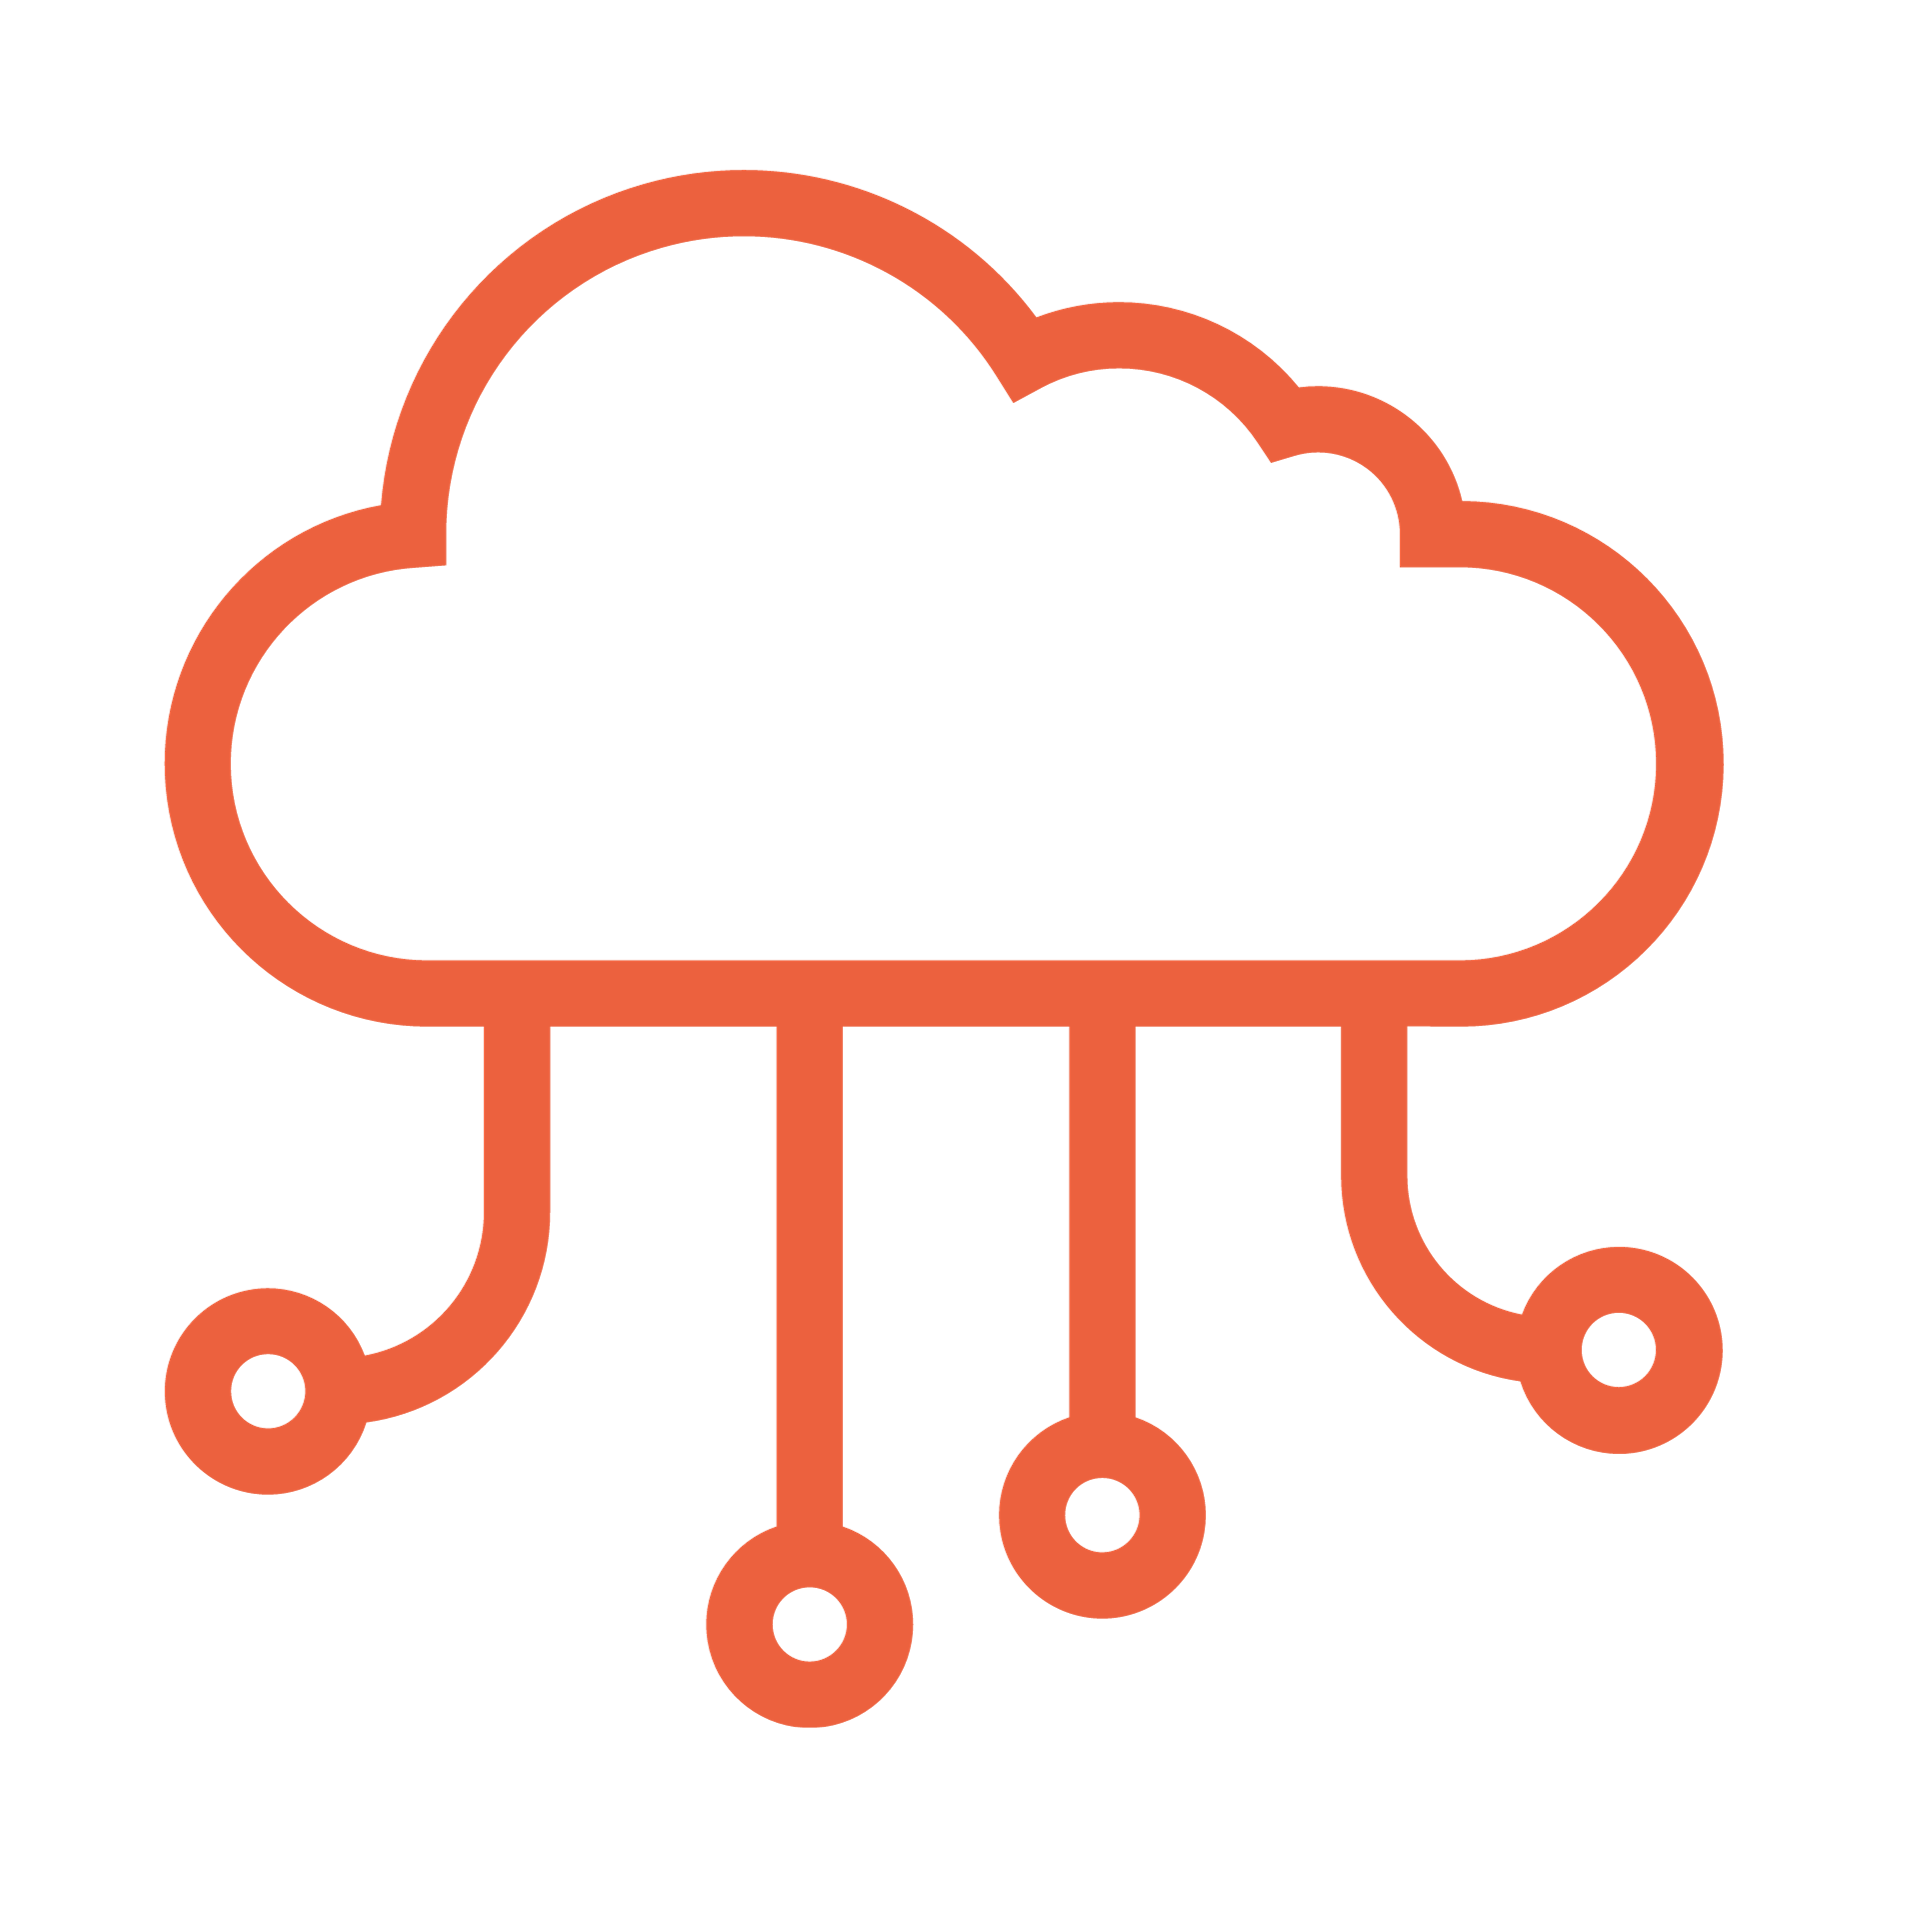 Cloud icon for Infrastructure Services